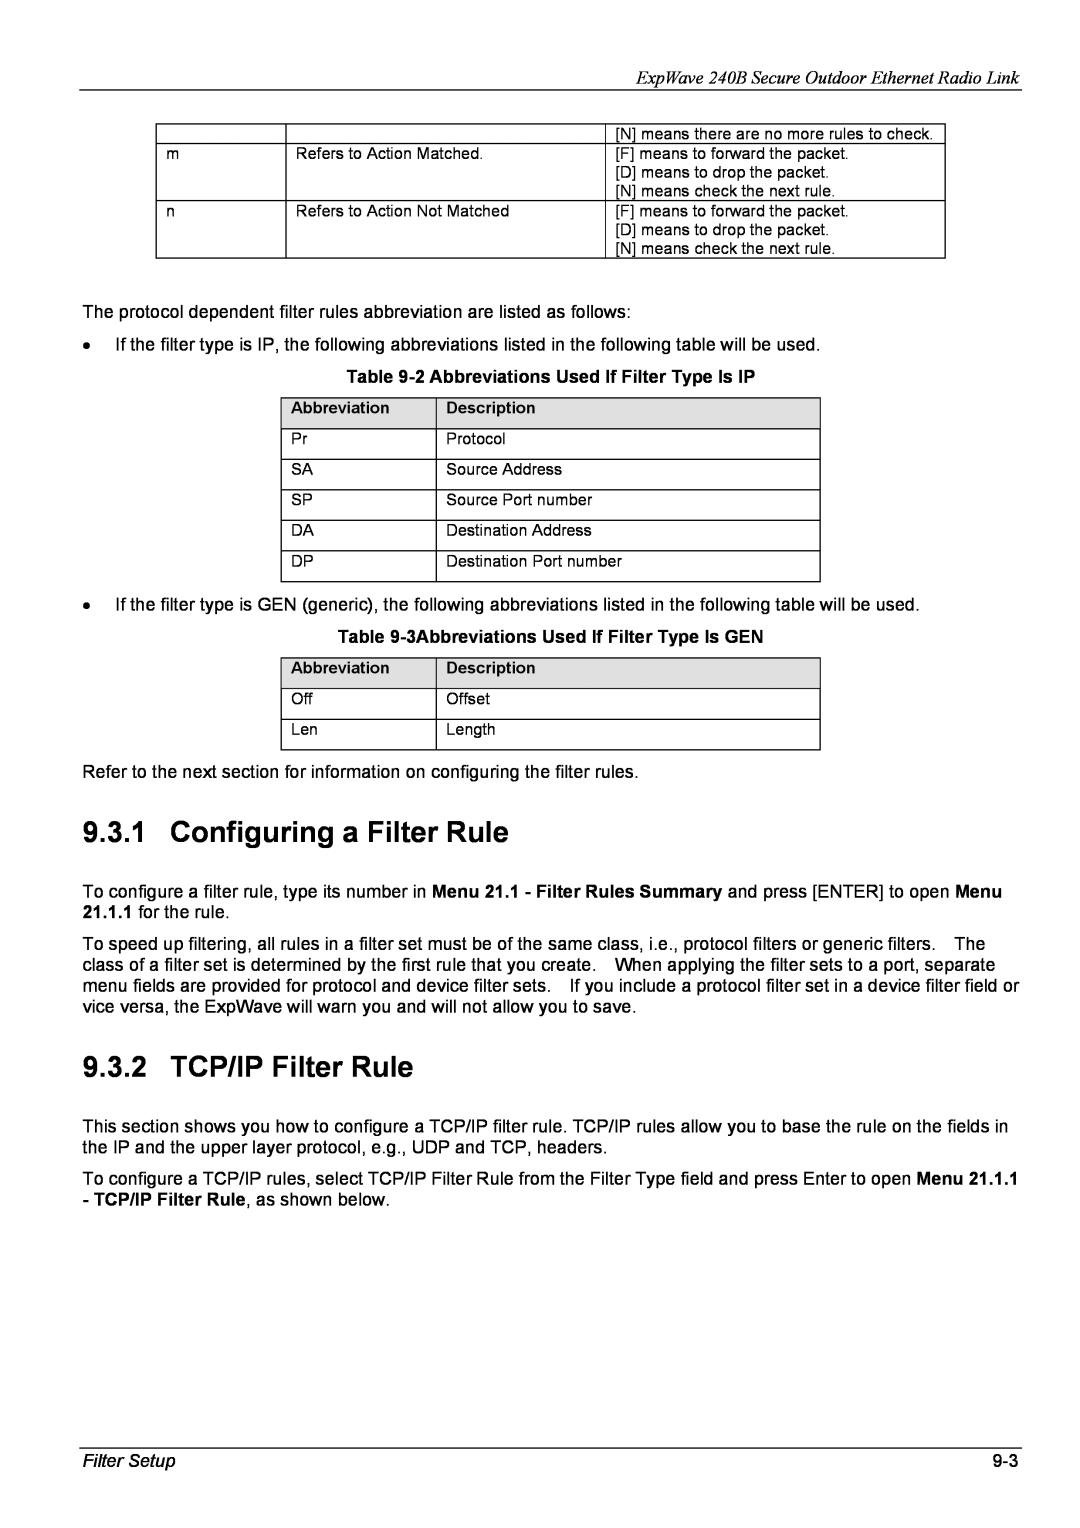 ZyXEL Communications 240B Configuring a Filter Rule, 9.3.2 TCP/IP Filter Rule, 2 Abbreviations Used If Filter Type Is IP 